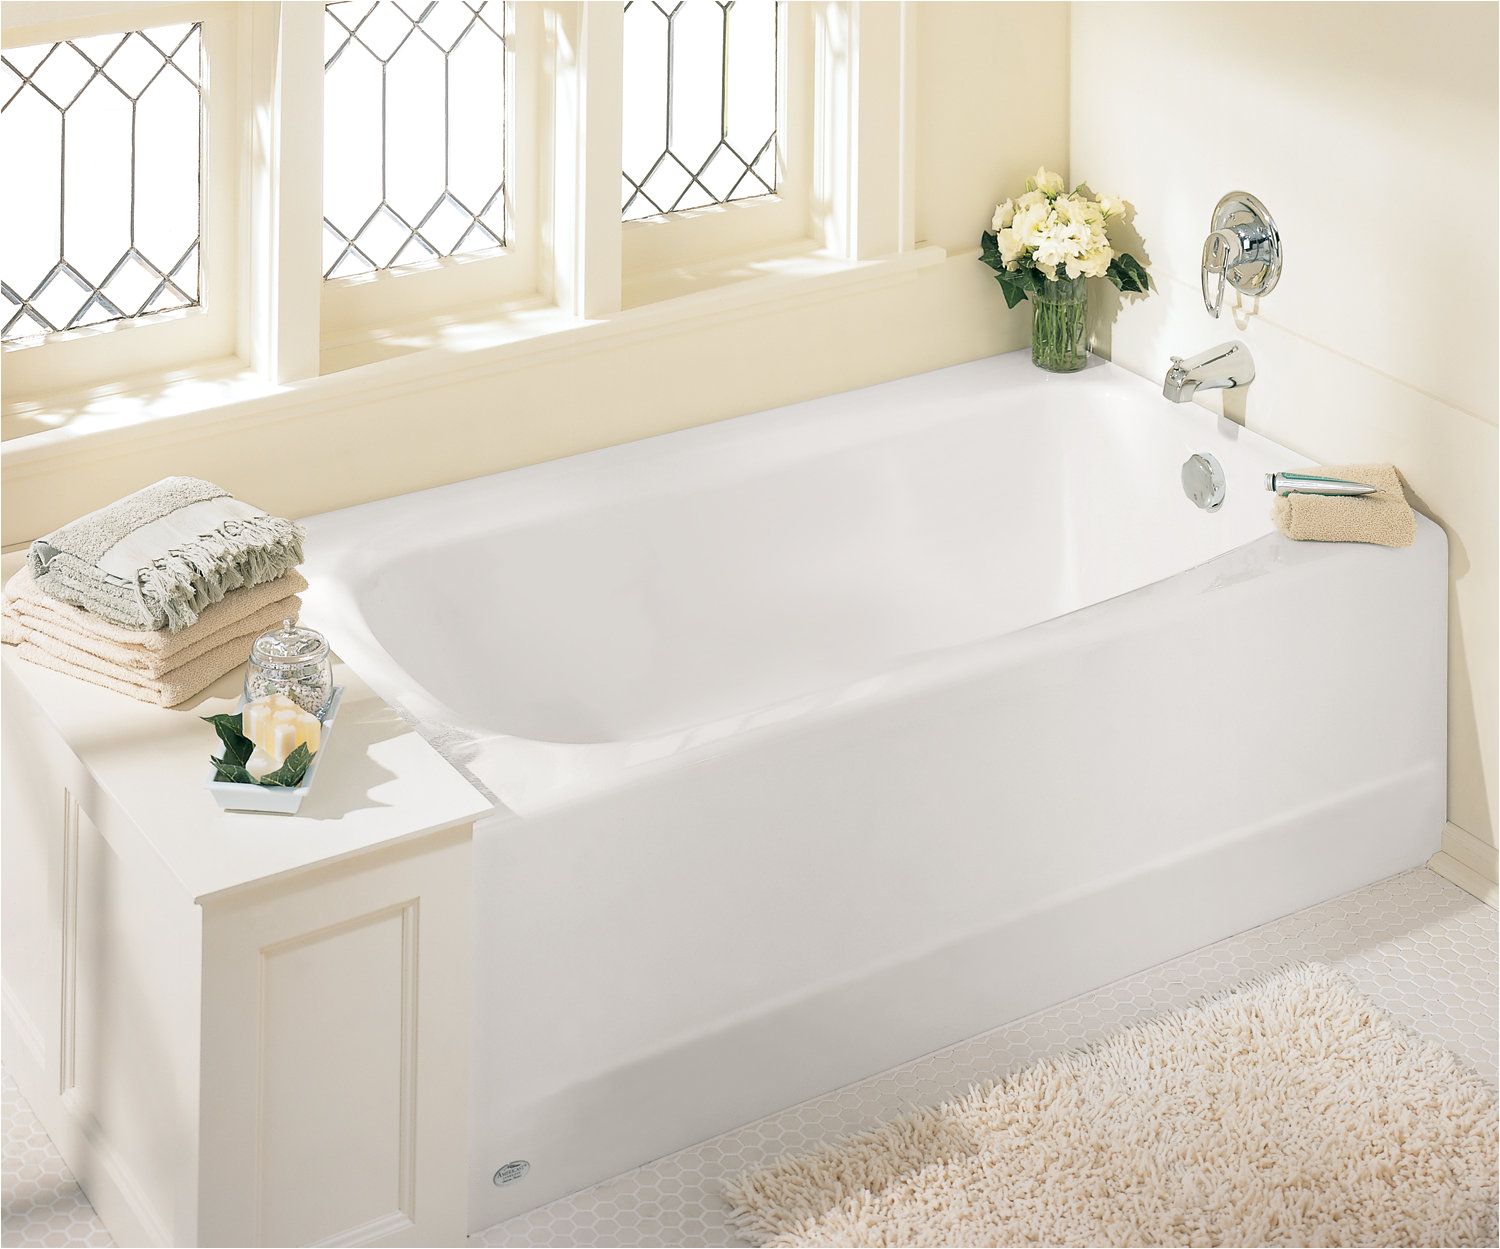 choose your best standard bathtub size and type will fit into your space